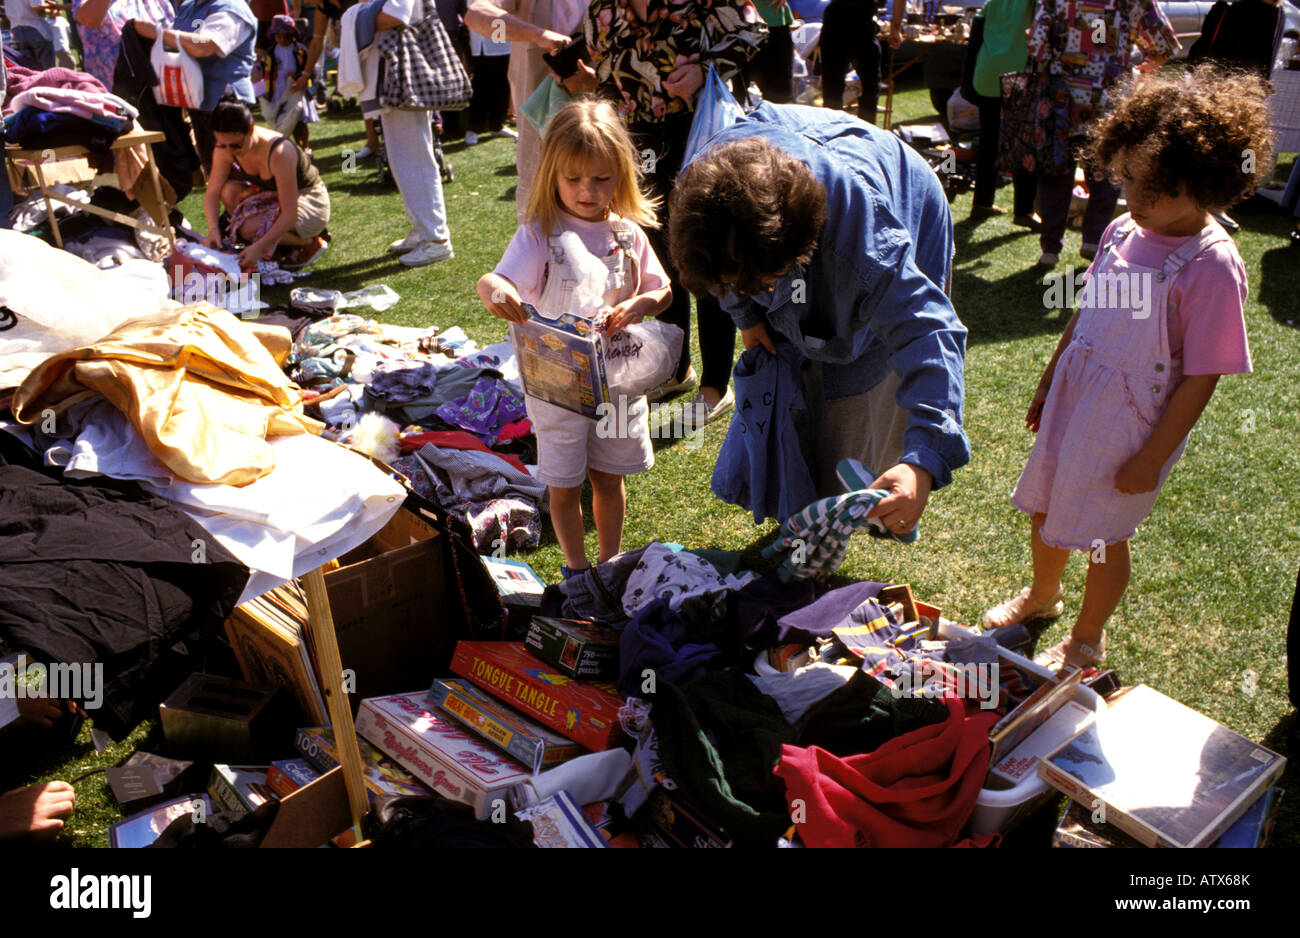 Bargain hunting at boot sale. Stock Photo